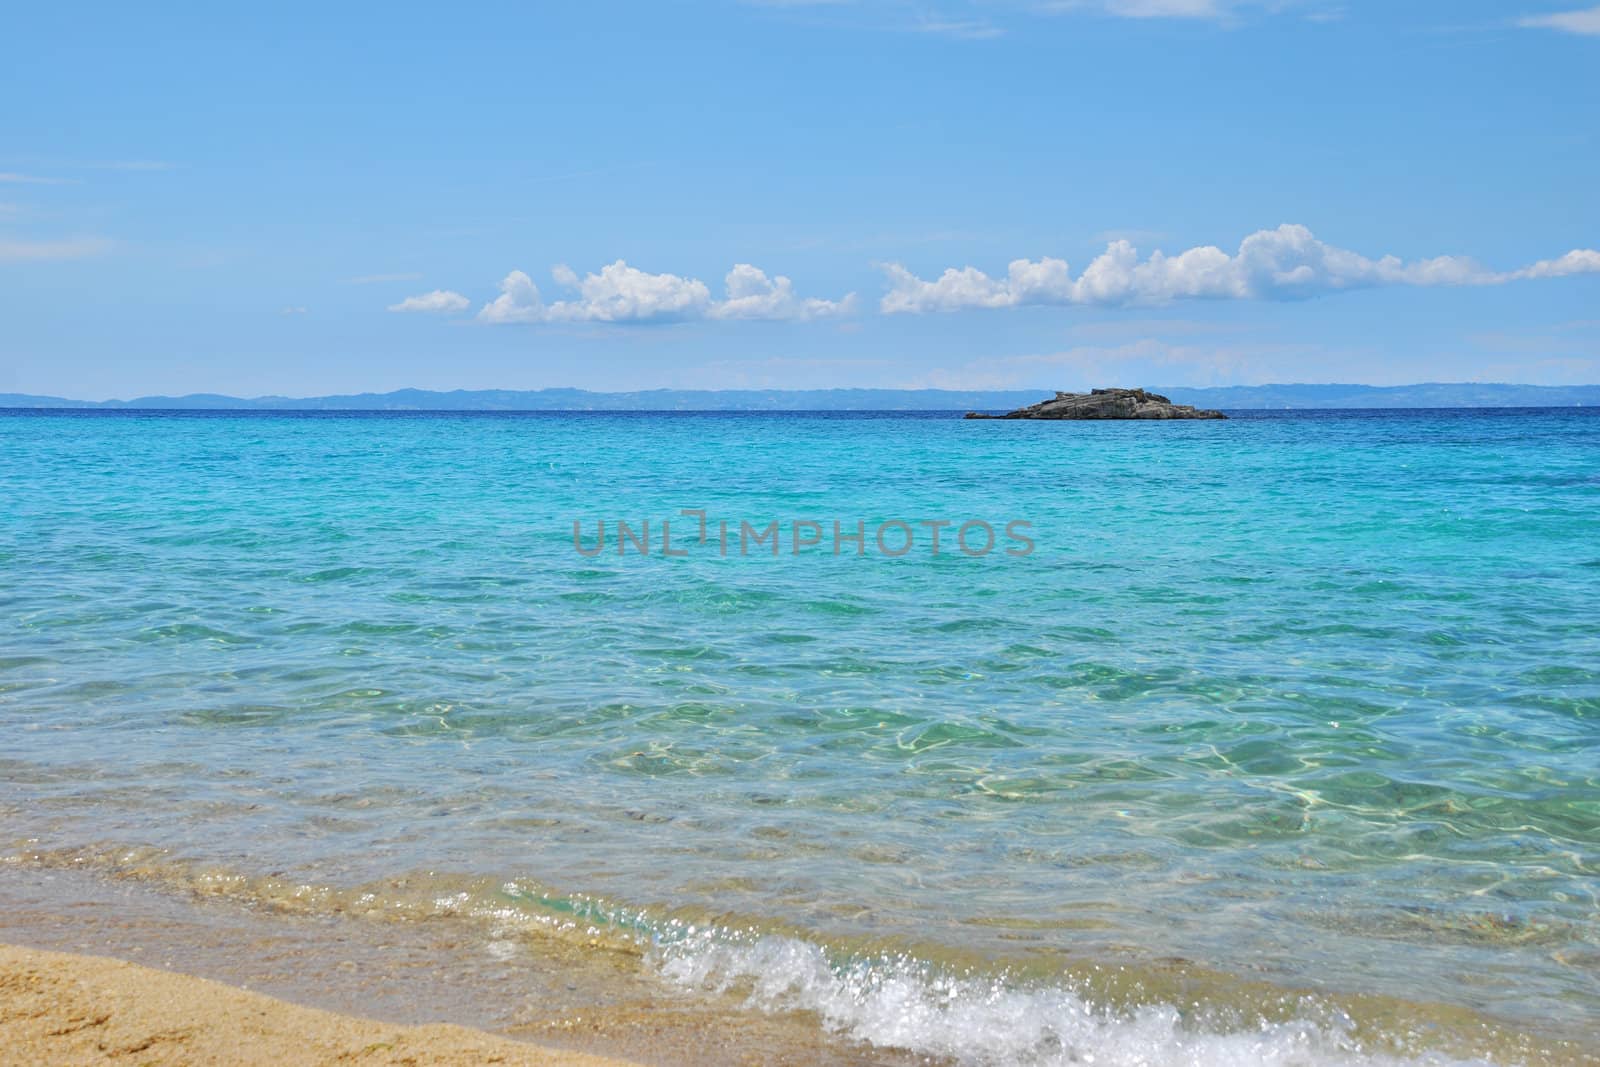 Kalogria beach in Sithonia, Chalkidiki, Greece, with a view on Kassandra peninsula.